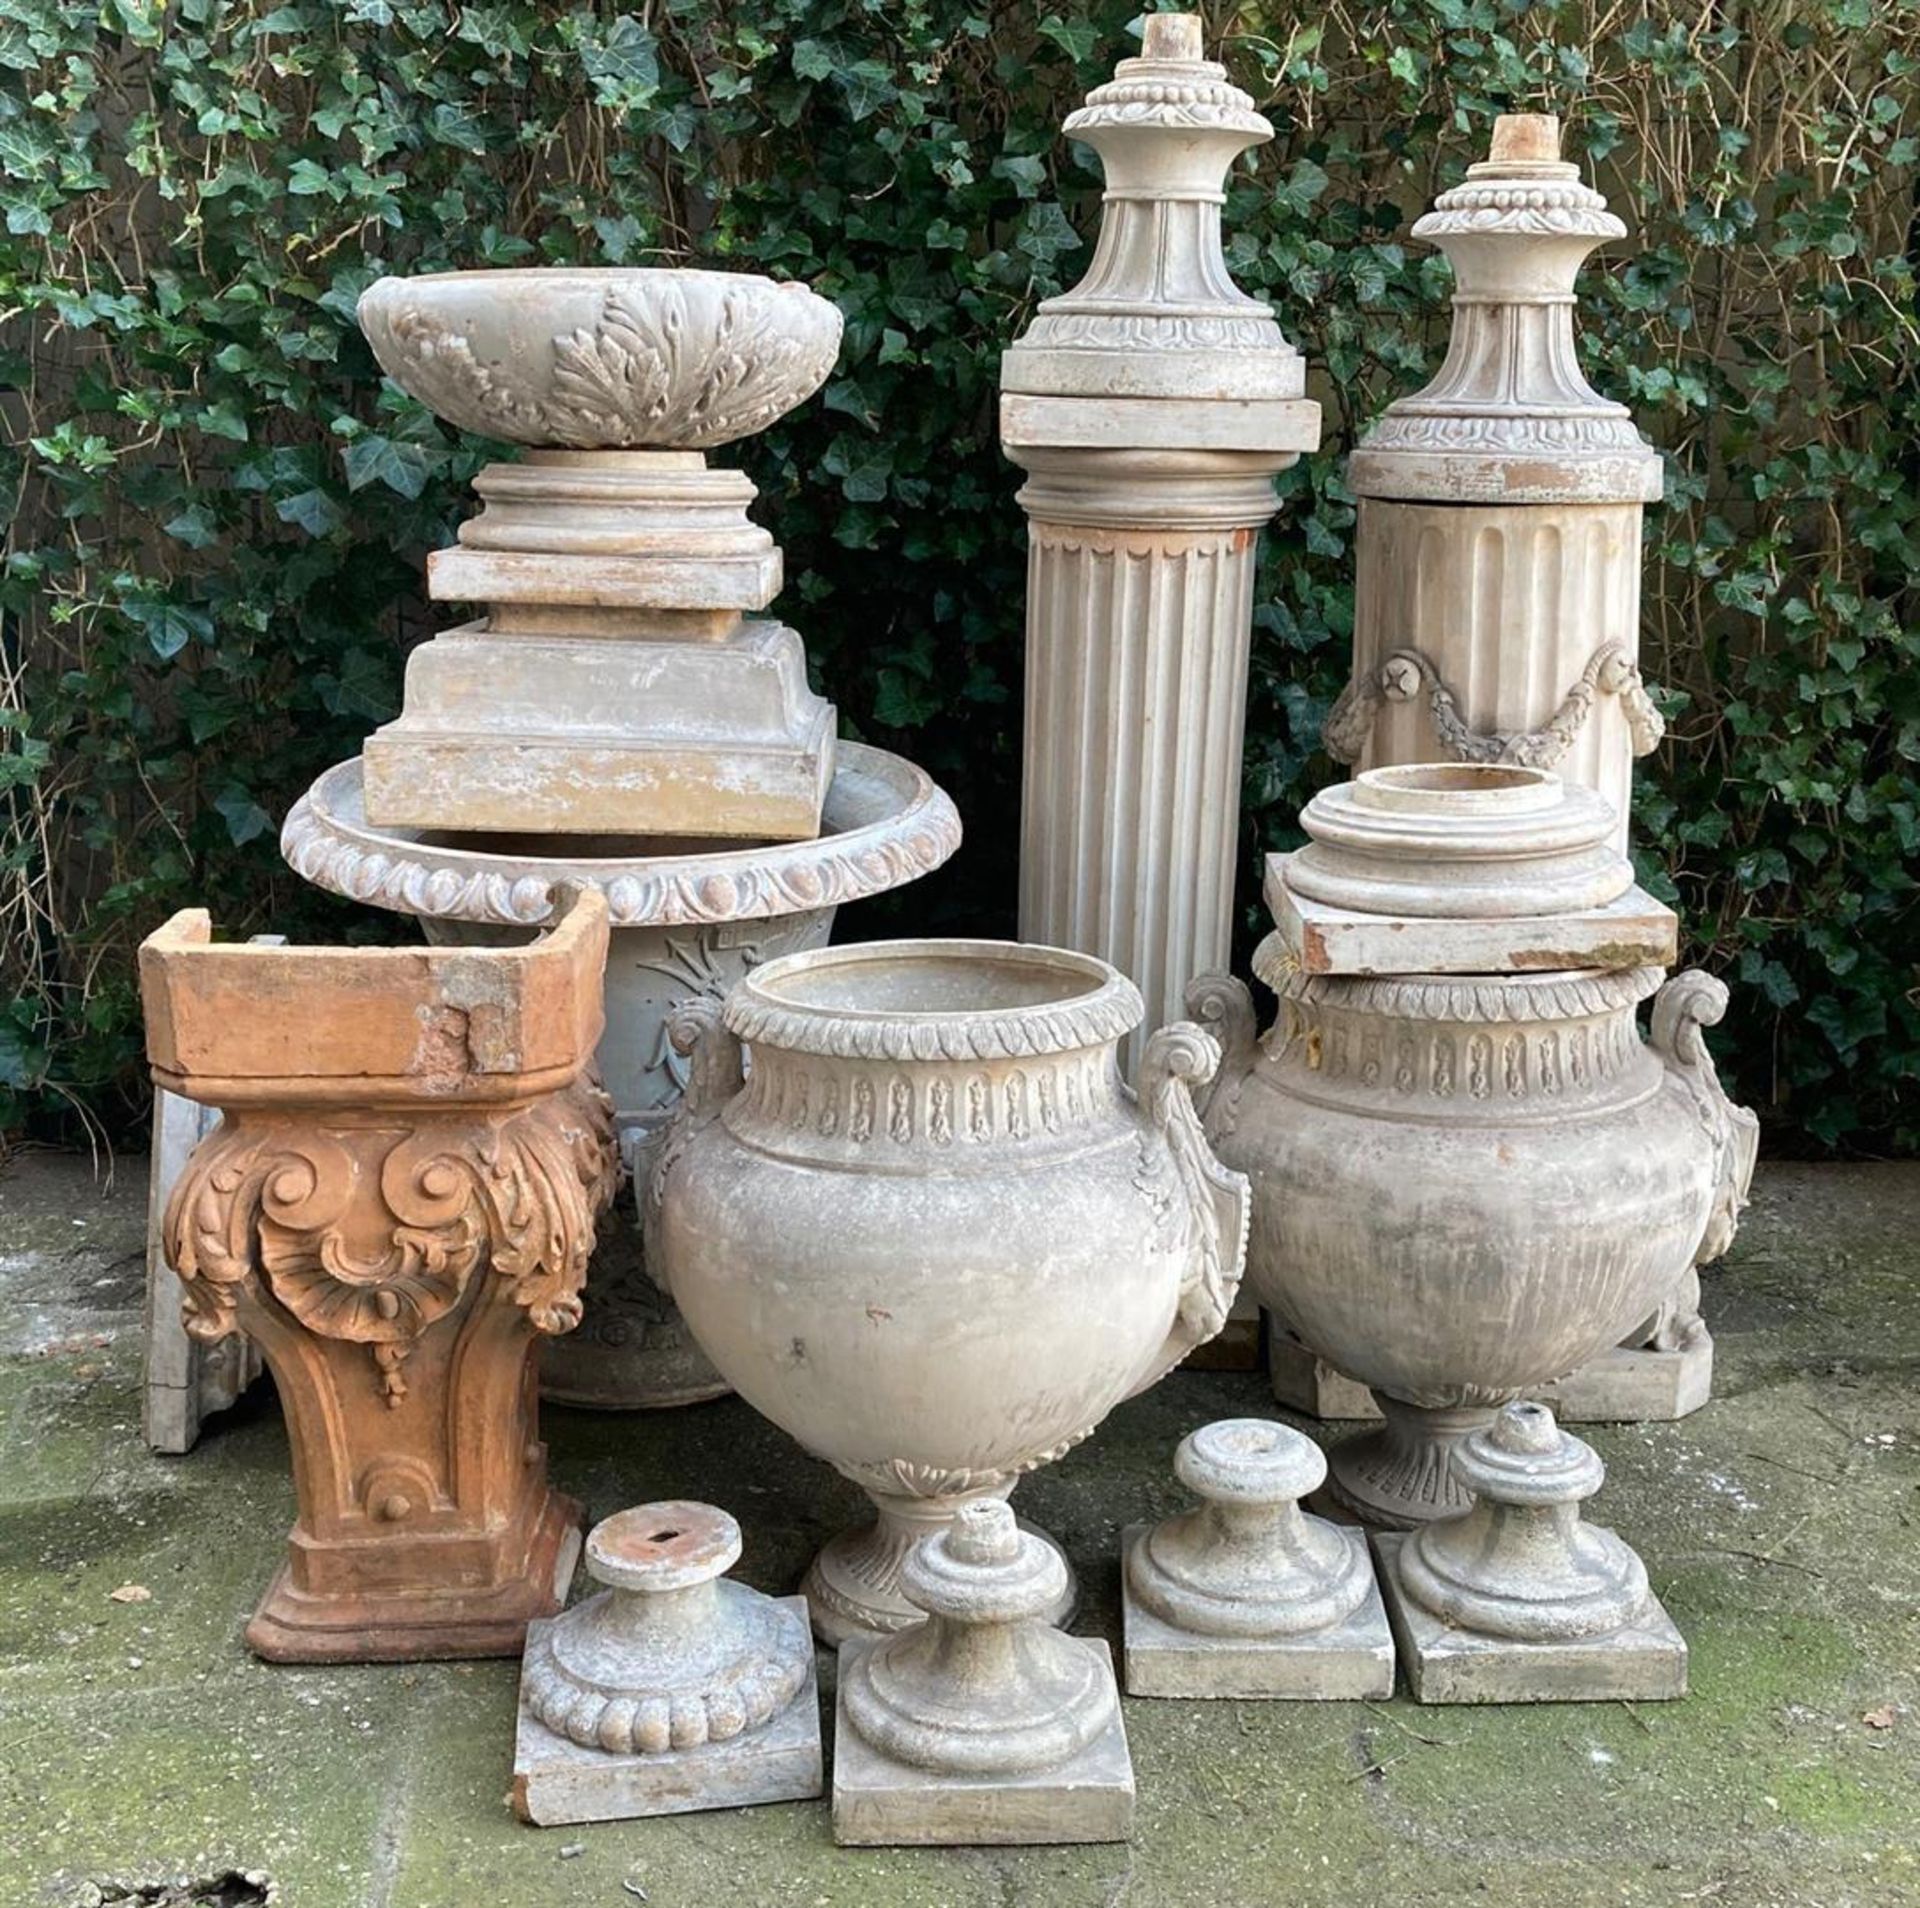 Lot with approx. 20 various ornaments, parts of garden sections made of ceramic